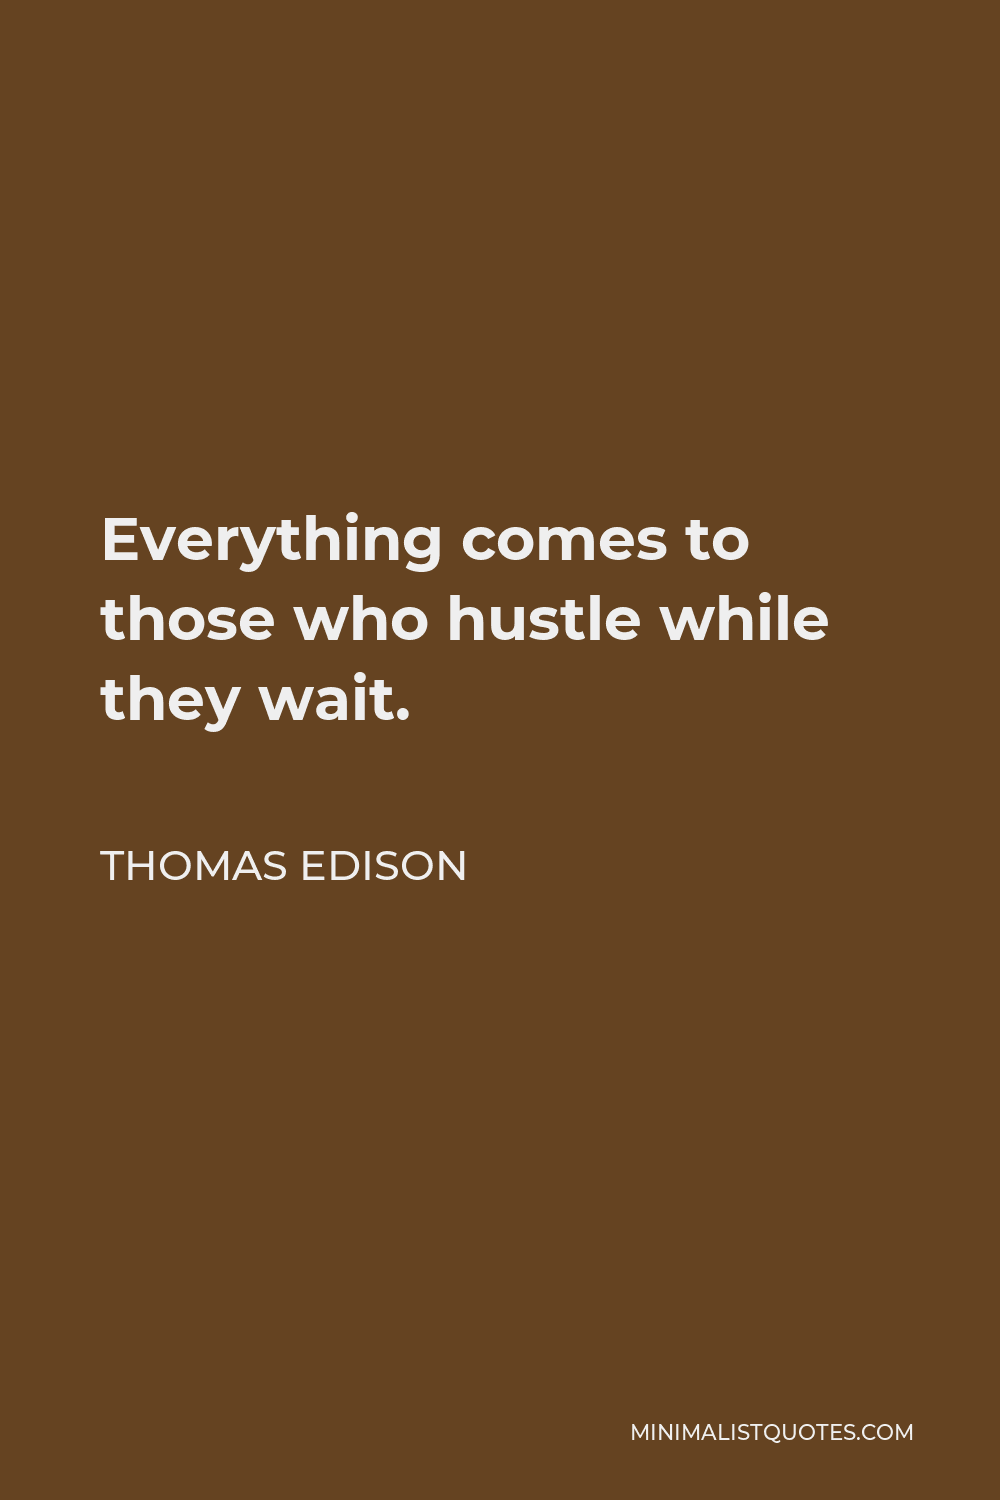 Thomas Edison Quote - Everything comes to those who hustle while they wait.